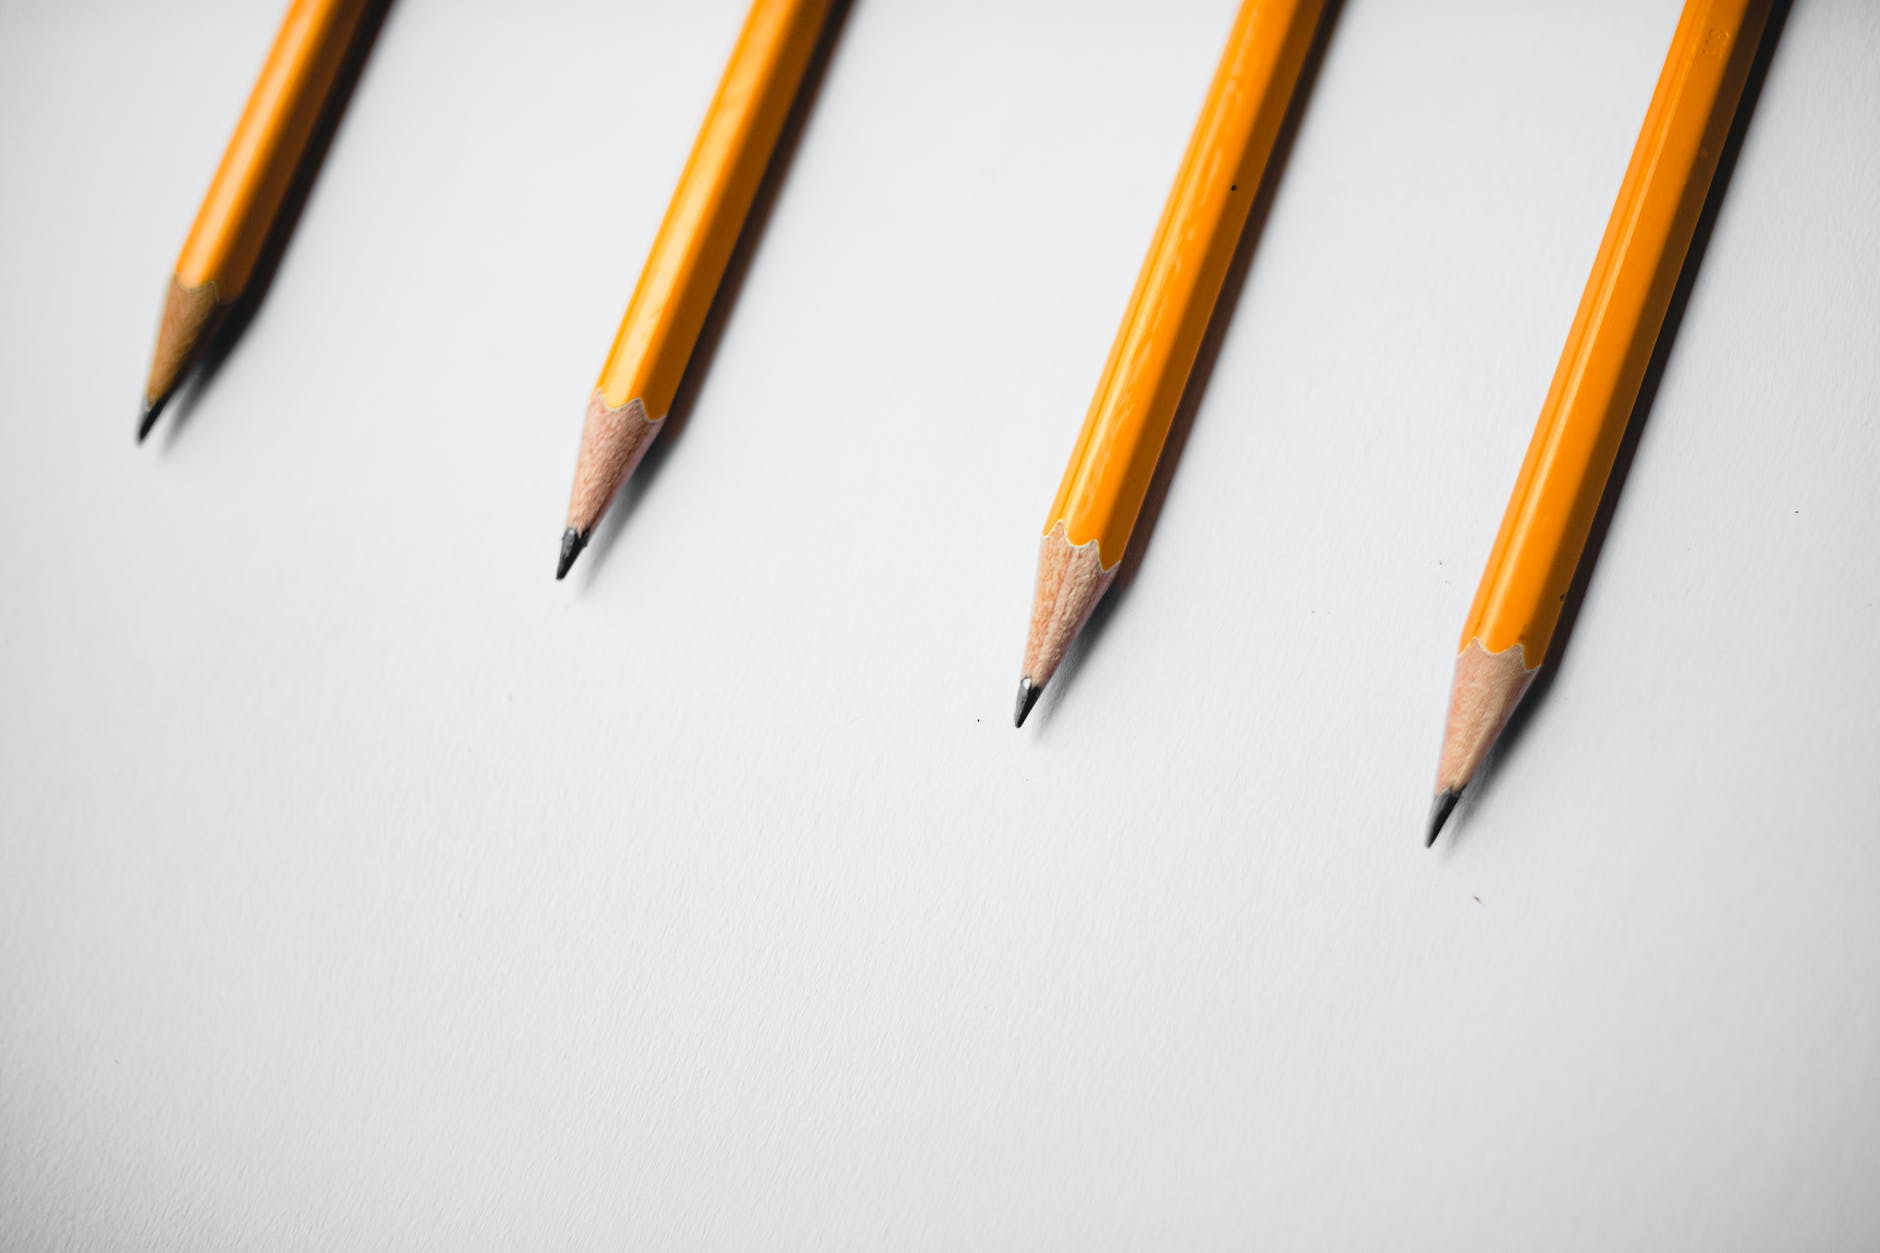 Four sharpened pencils against a white background. 